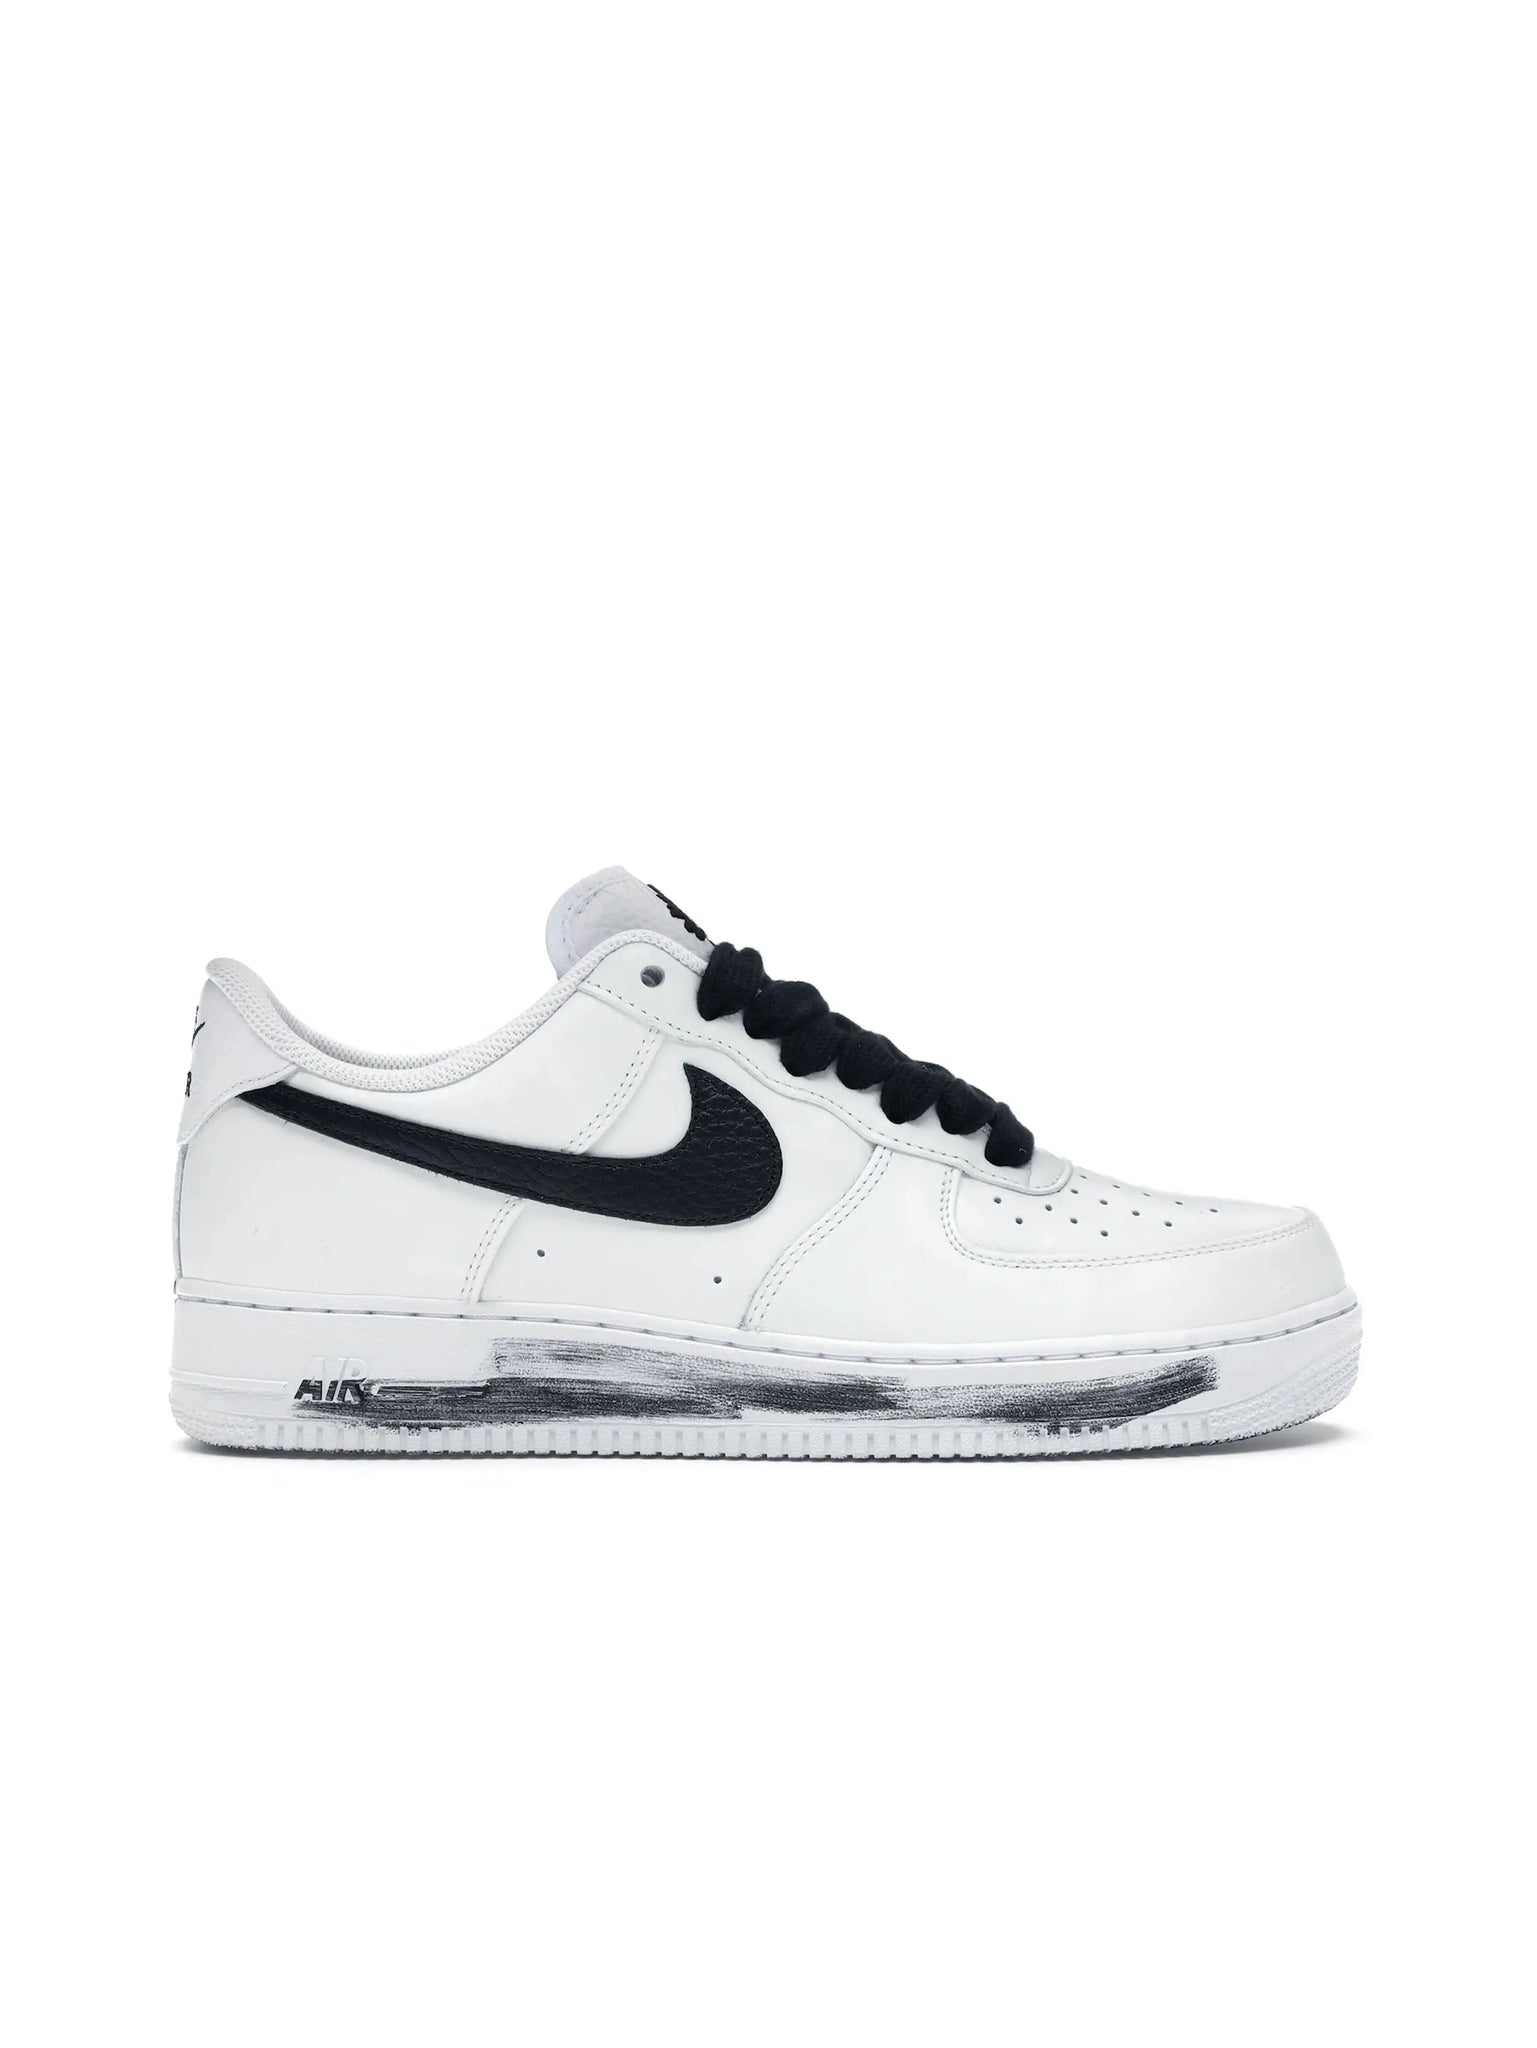 Nike Air Force 1 Low G-Dragon Peaceminusone Para-Noise 2.0 in Auckland, New Zealand - Shop name